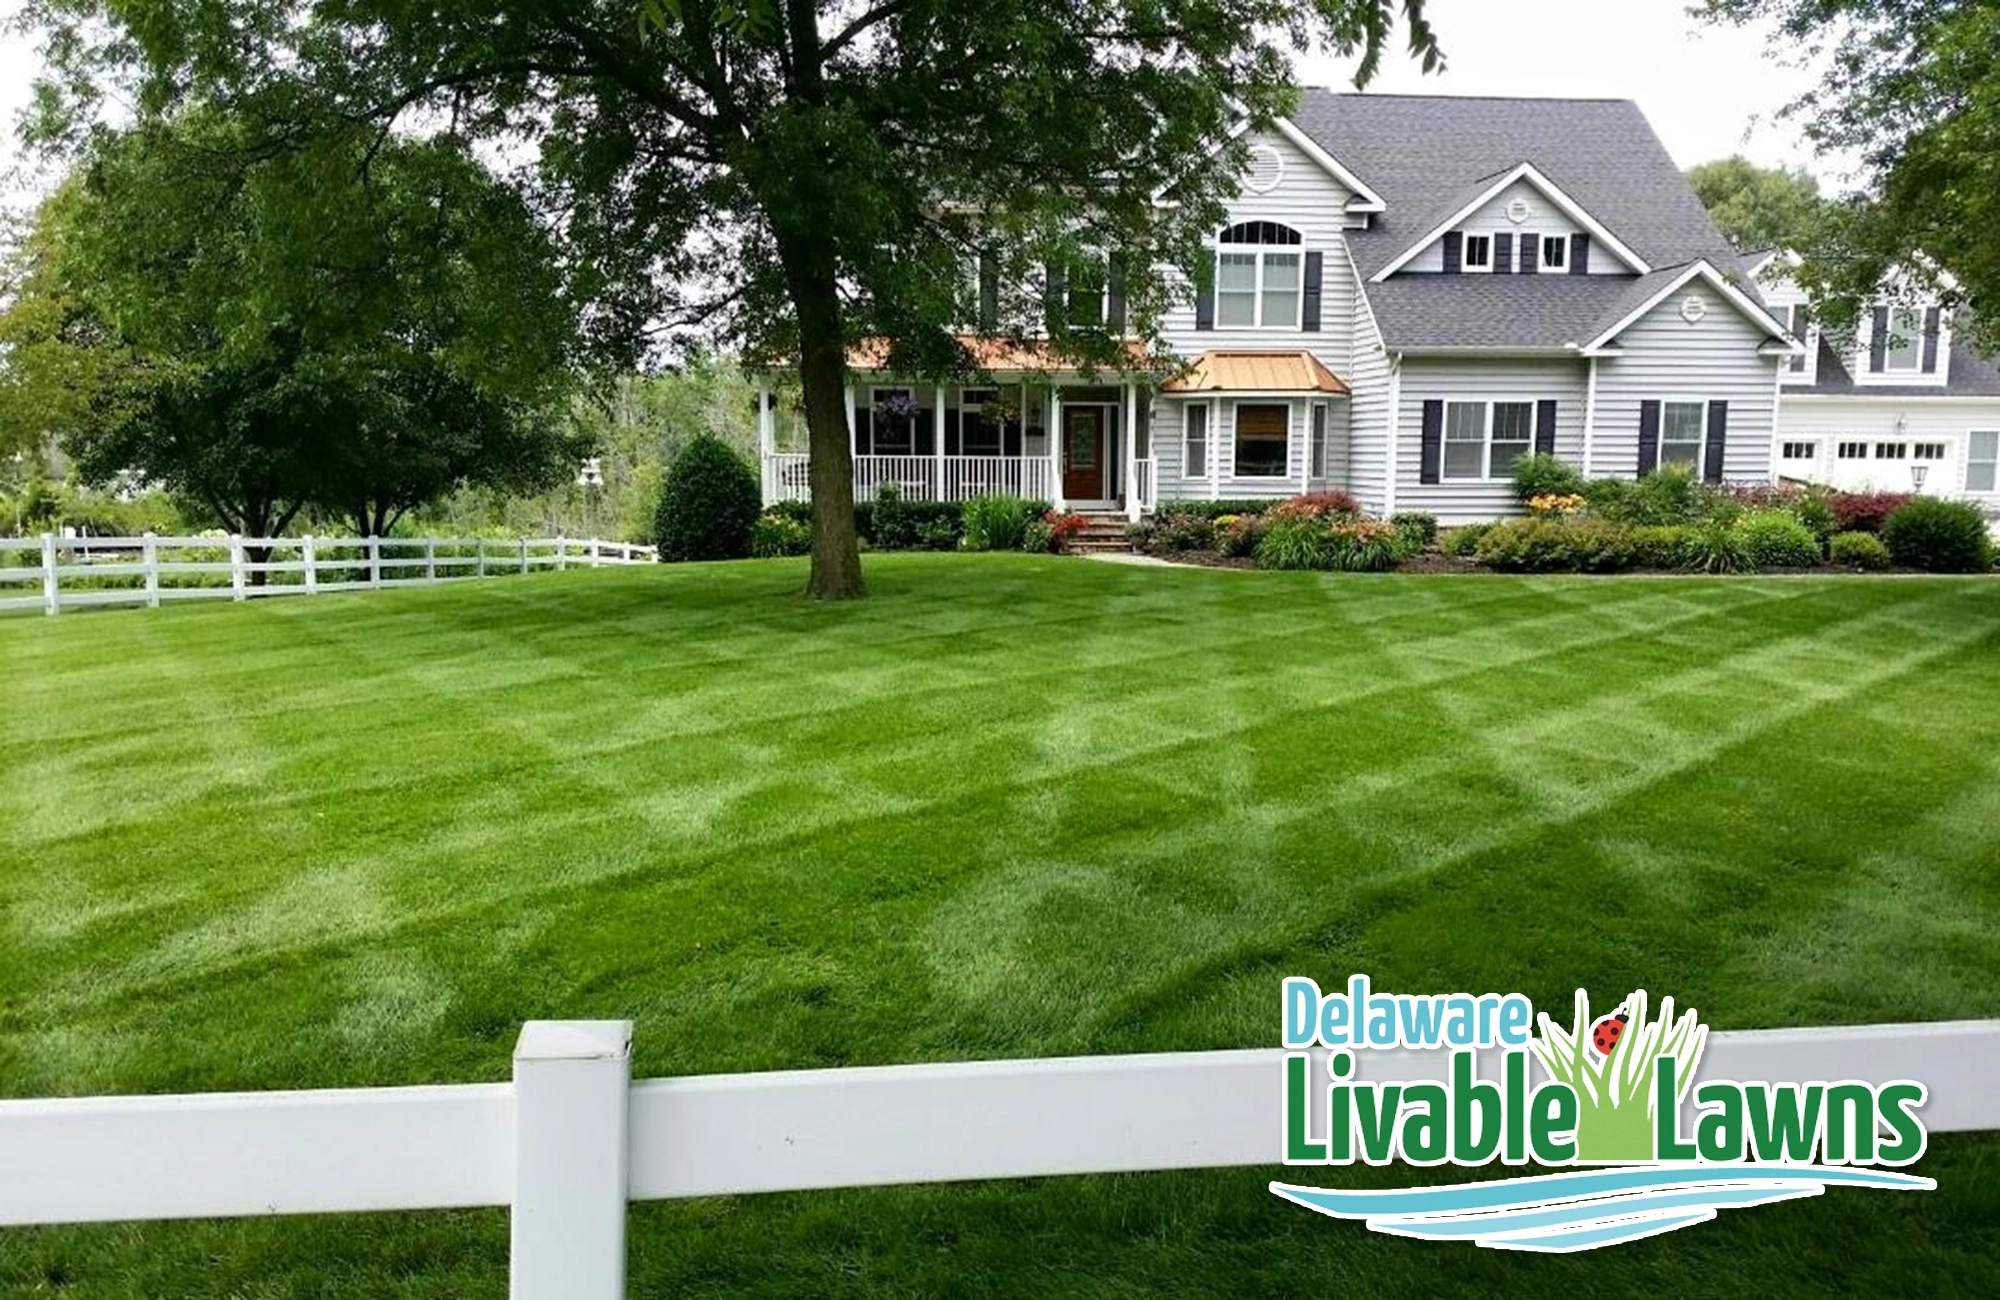 <h3>Livable Lawns Program</h3>
<p>Did you know that the EPA considers stormwater runoff from yards, streets, parking lots and other areas to be one of the most significant sources of contamination in our country’s waters? Delaware Livable Lawns aims to certify lawn care companies that follow environmentally-friendly practices in fertilizer application. We are proud to be a certified livable lawn company and be a partner as stewards of our environment.</p>